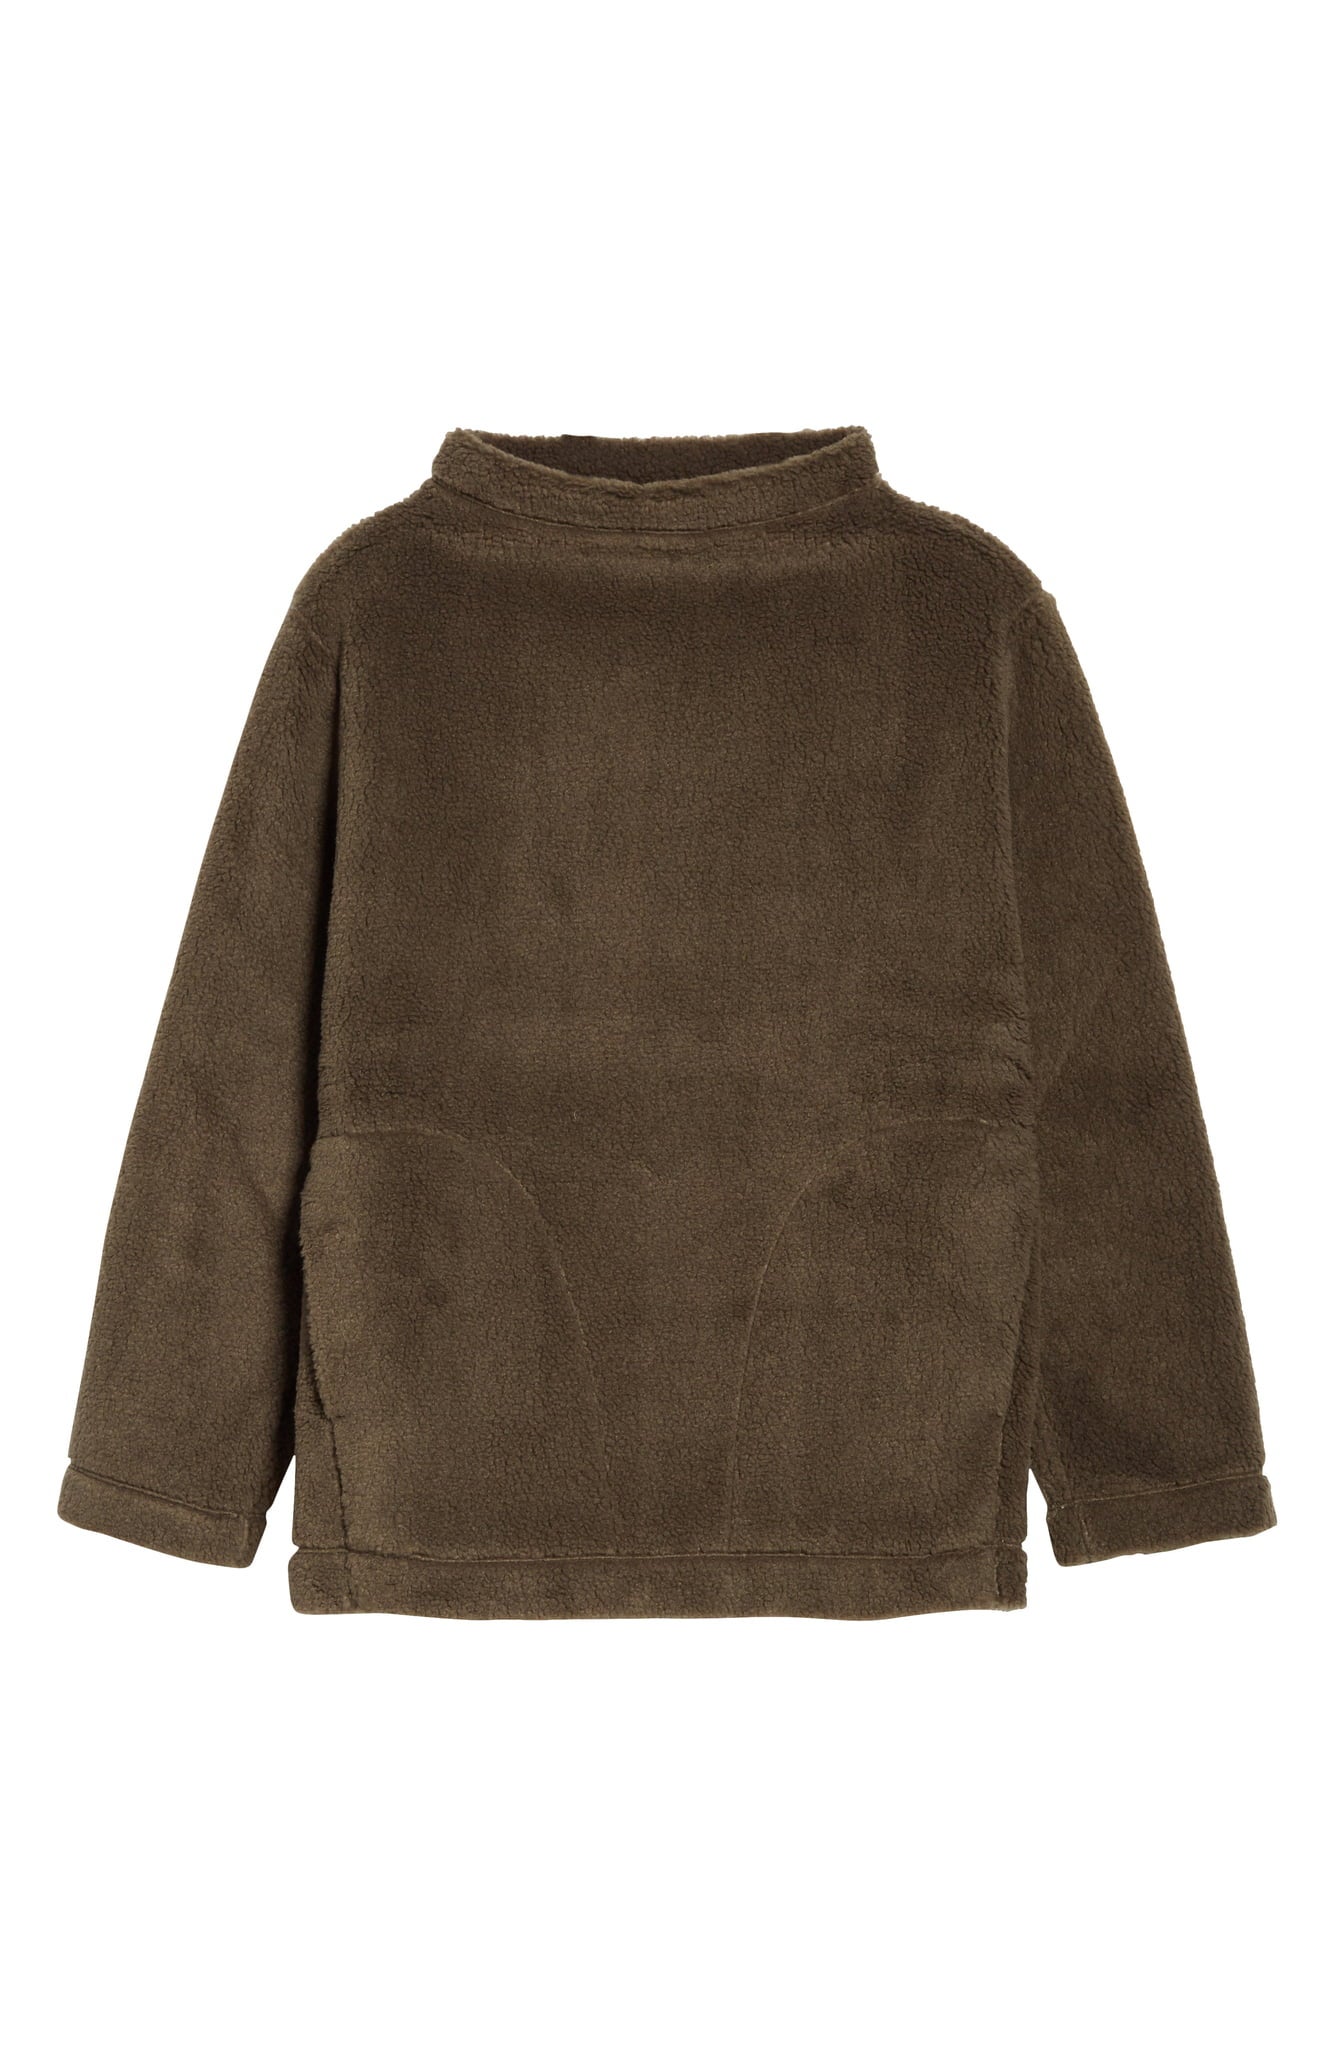 Nordstrom Launches an Exclusive Unisex Collection with Eileen Fisher ...